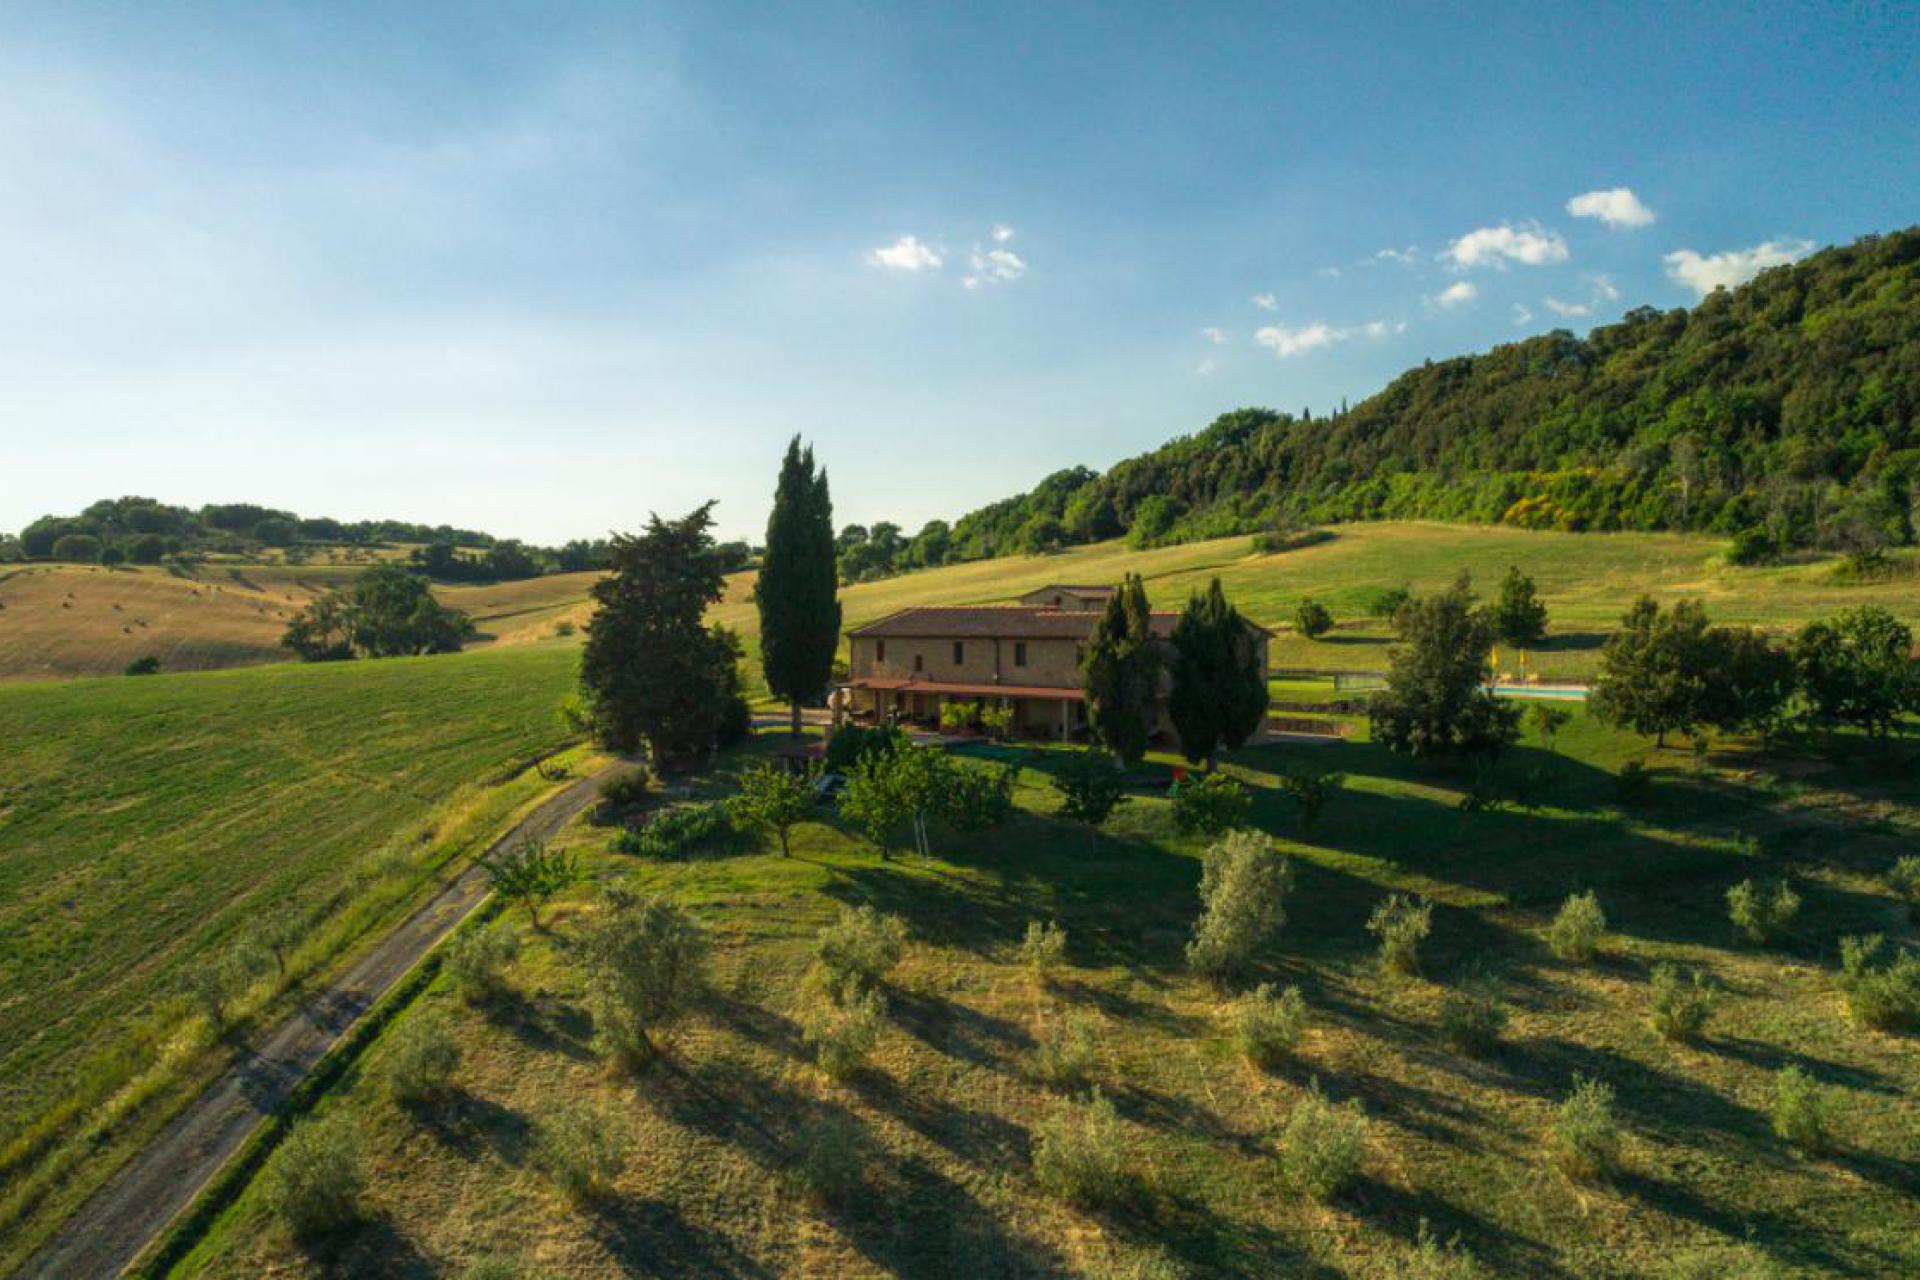 Centrally located, friendly agriturismo with plenty of room to play